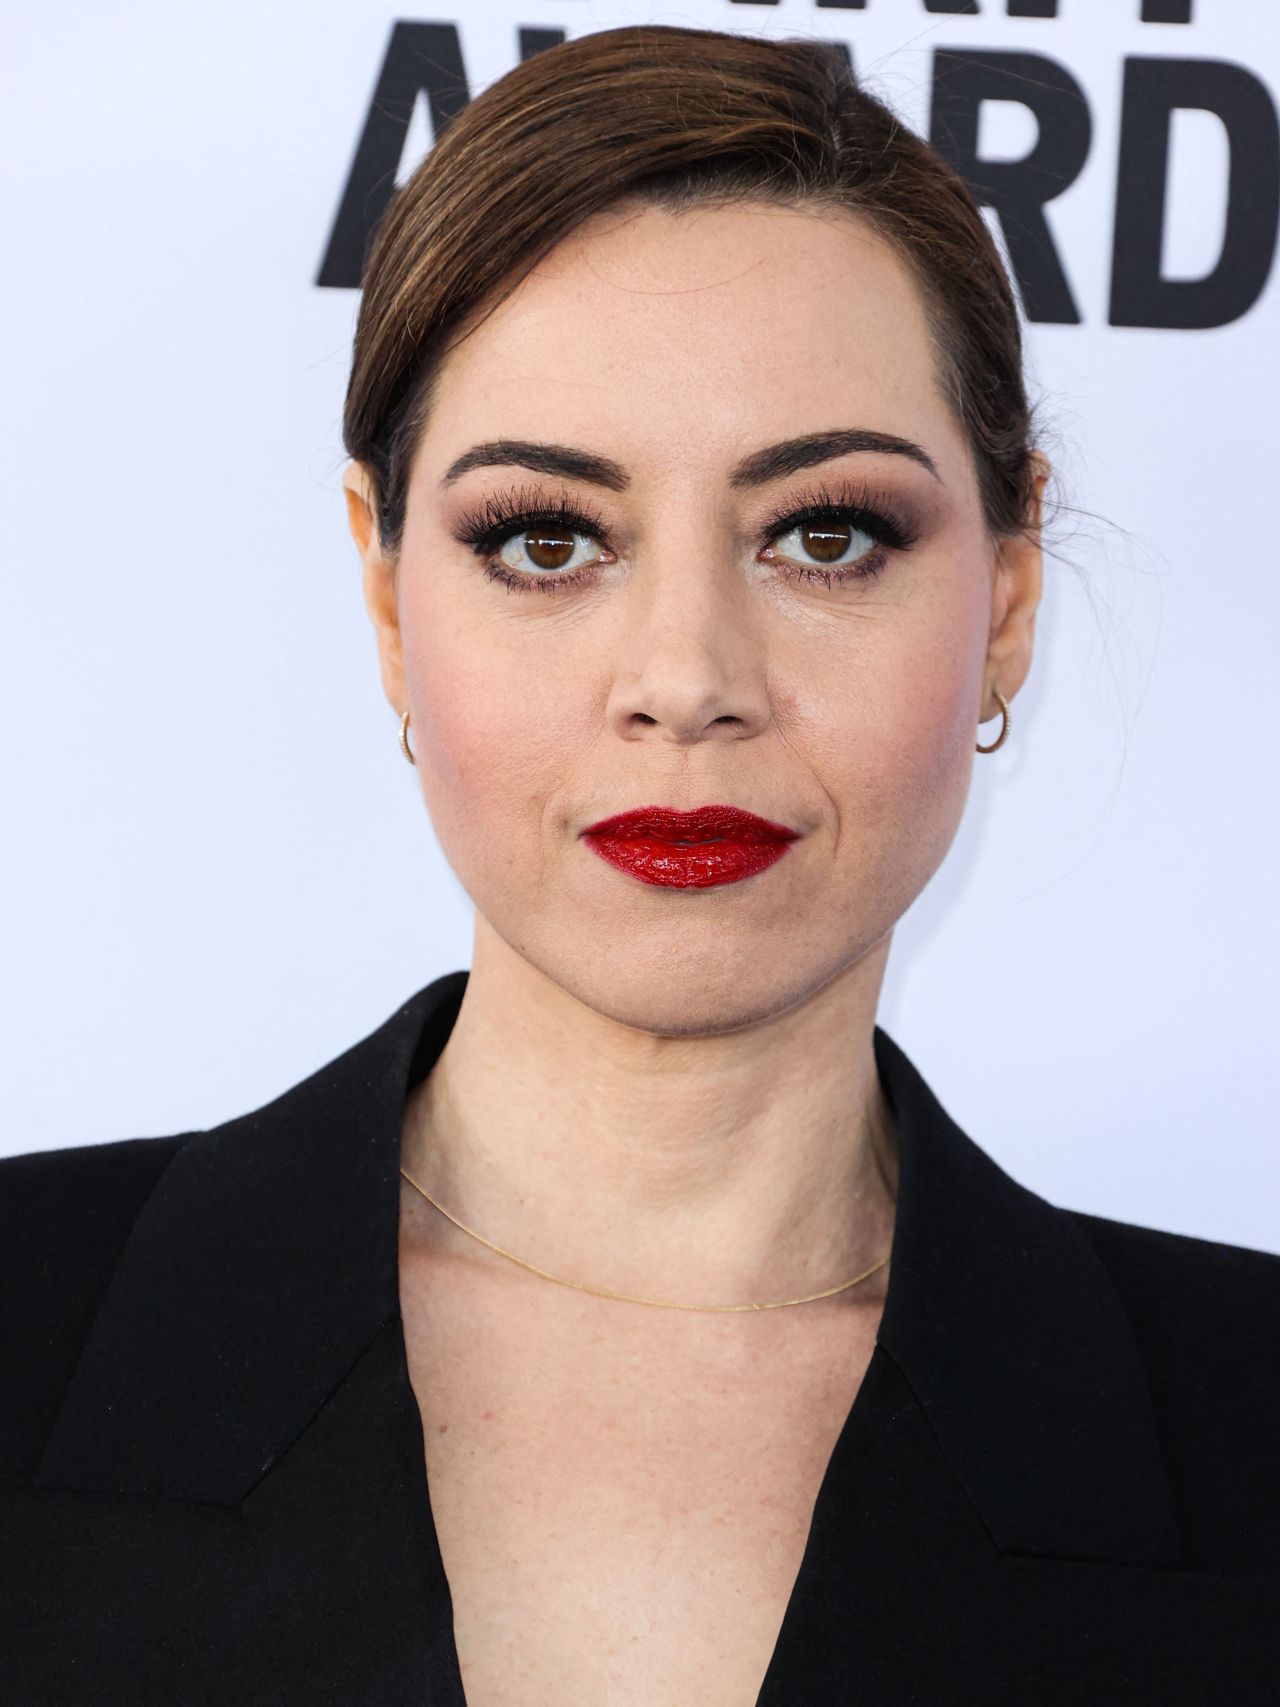 AUBREY PLAZA AT THE INDEPENDENT SPIRIT AWARDS IN LOS ANGELES12